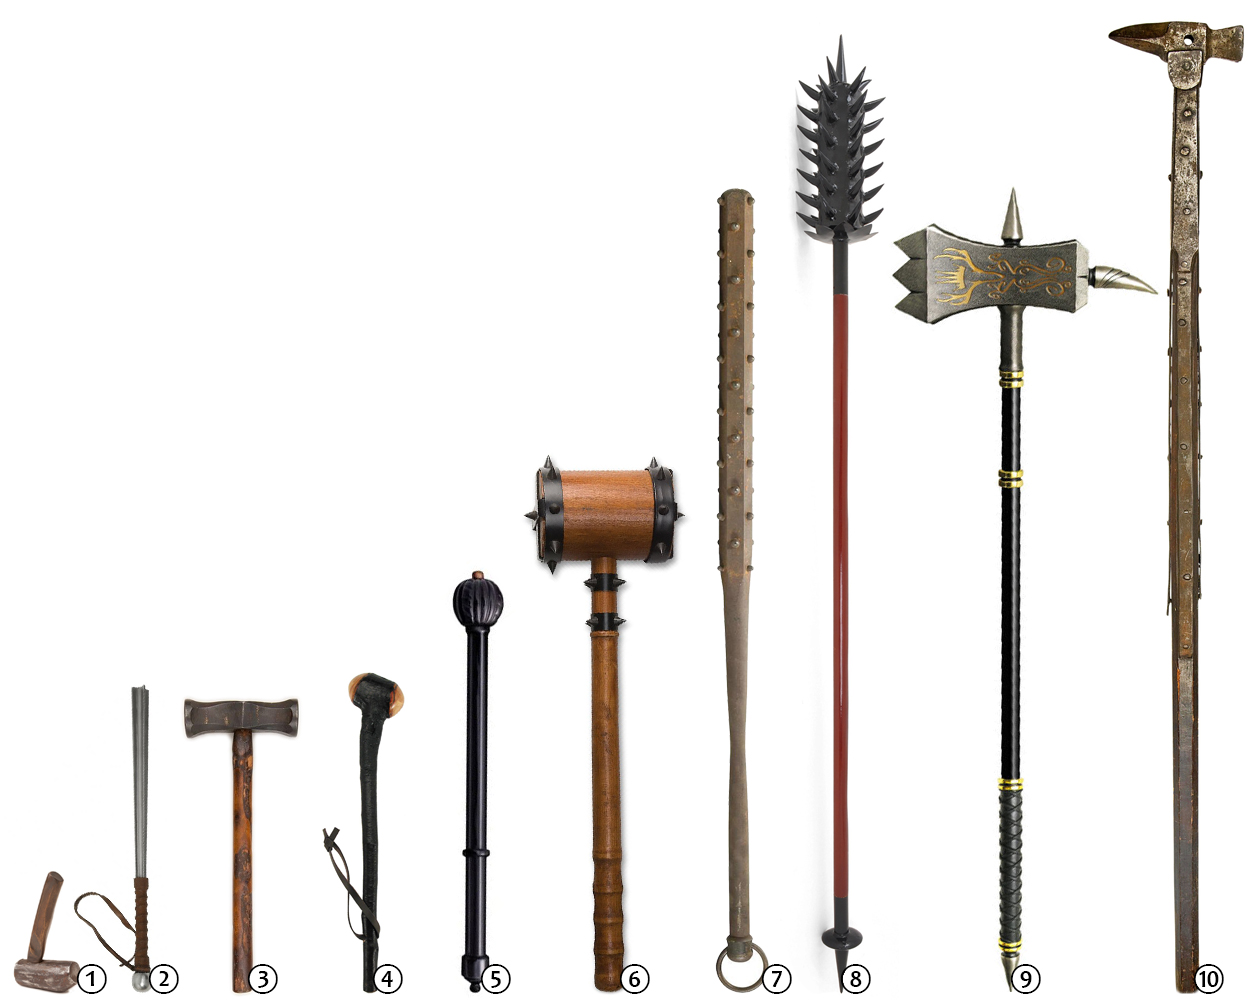 Dnd Maul Weapon 10 Images - Maul Of Zeus God Of War Wiki Fandom Powered By ...